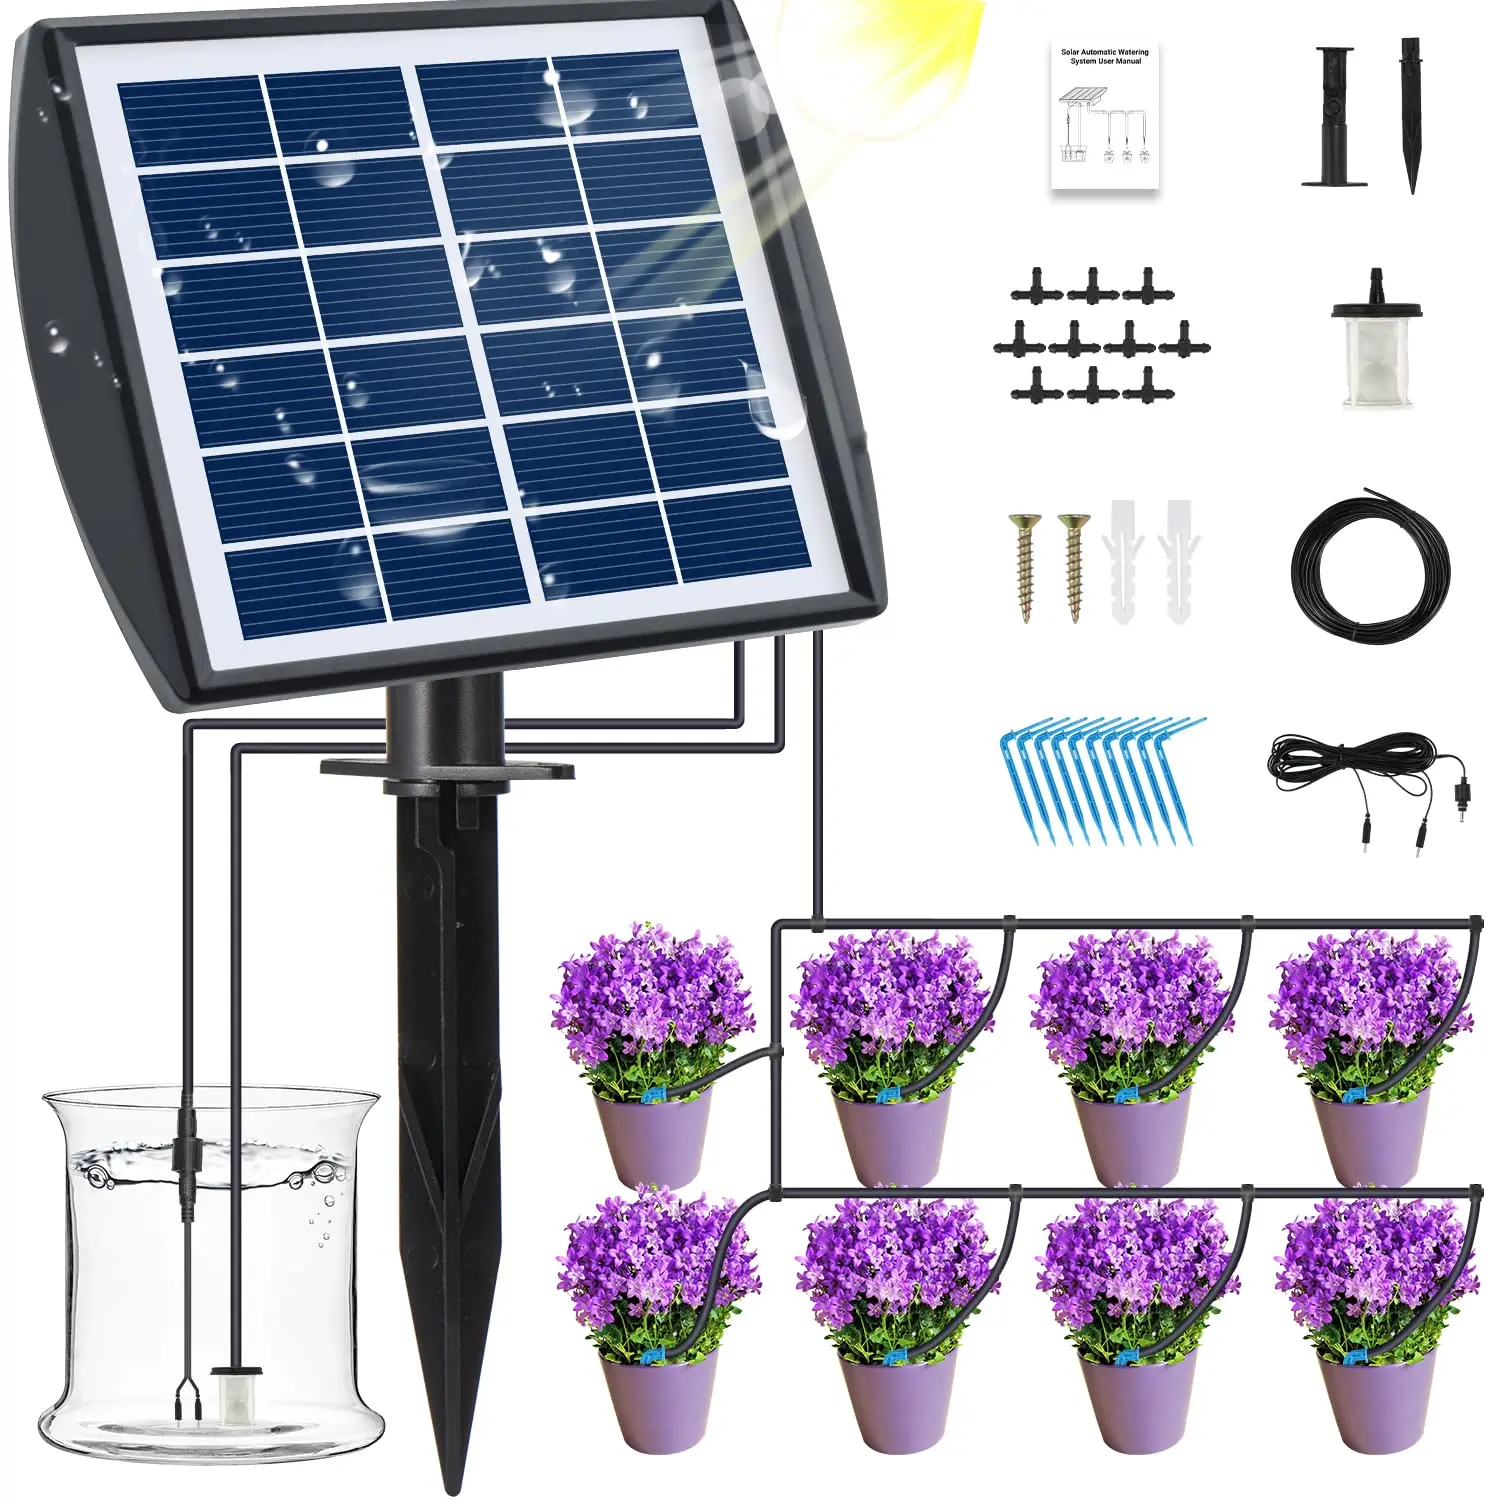 

Solar Irrigation Auto Watering System Solar Powered Automatic Drip Irrigation Kit for Plants in the Plant Bed and Green House.